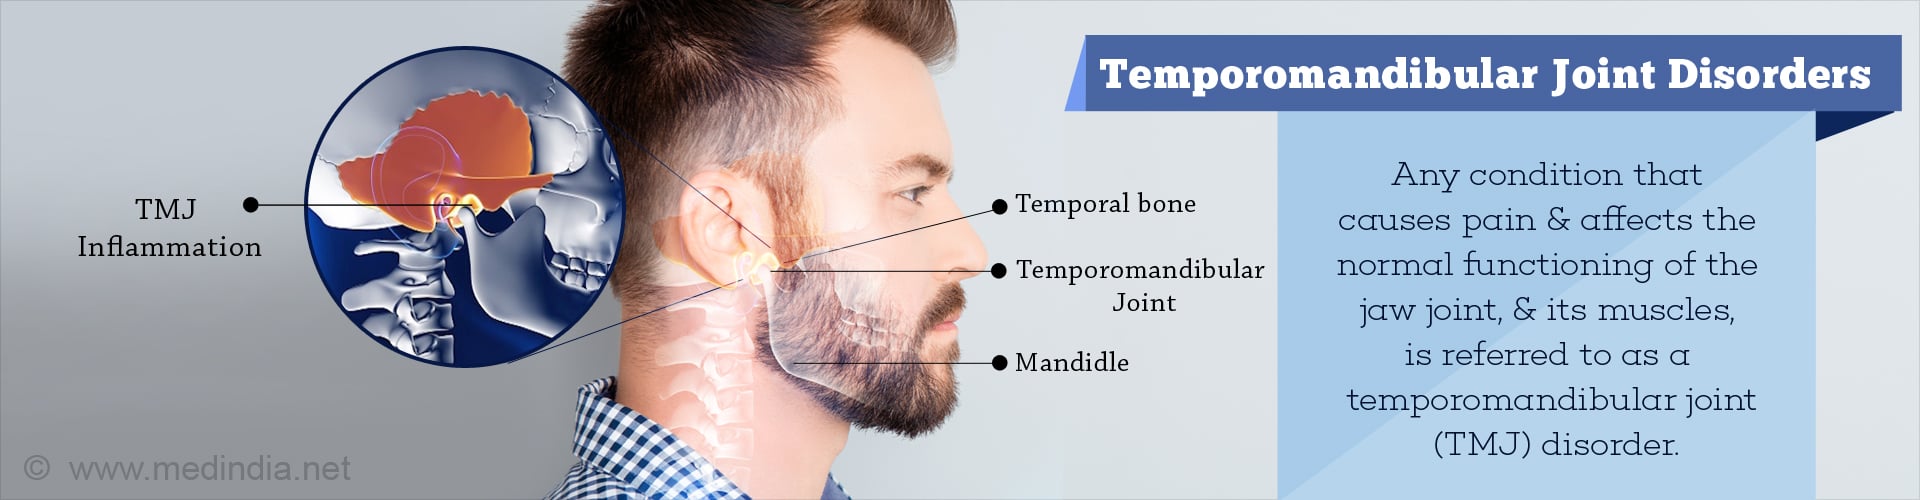 Temporomandibular Joint Disorder
Any condition that causes pain and affects the normal functioning of the jaw joint, and its muscles, is referred to as a Temporomandibular joint (TMJ) disorder
- TMJ inflammation
- Temporal bone
- Temporomandibular Joint
- Mandible